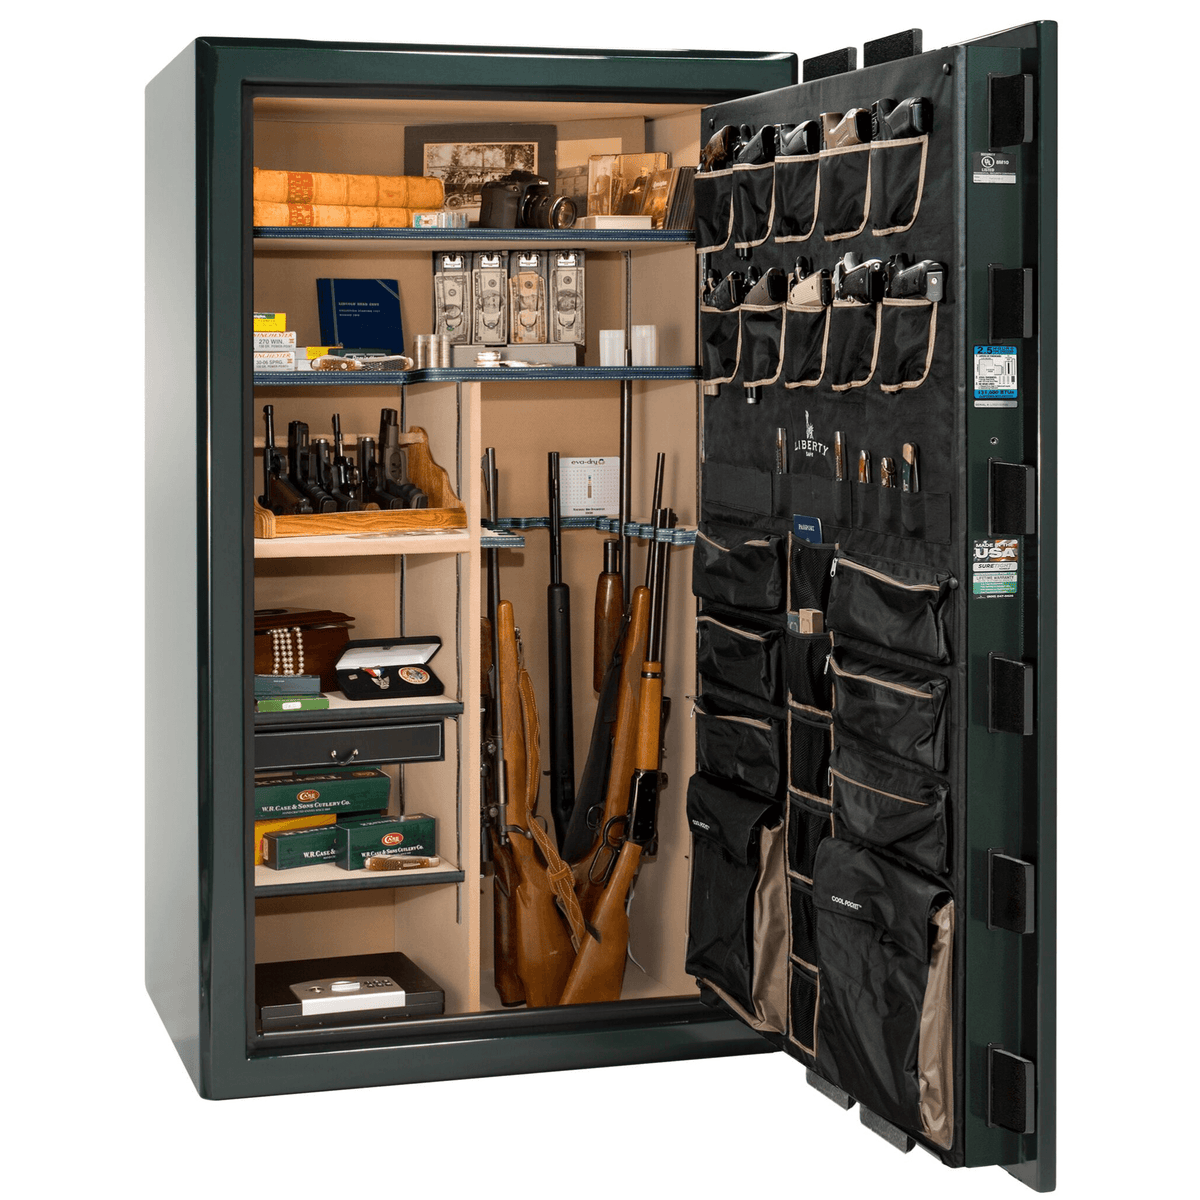 Presidential Series | Level 8 Security | 2.5 Hours Fire Protection | 50 | Dimensions: 72.5"(H) x 42.25"(W) x 32"(D) | Green Gloss | Gold Hardware | Electronic Lock